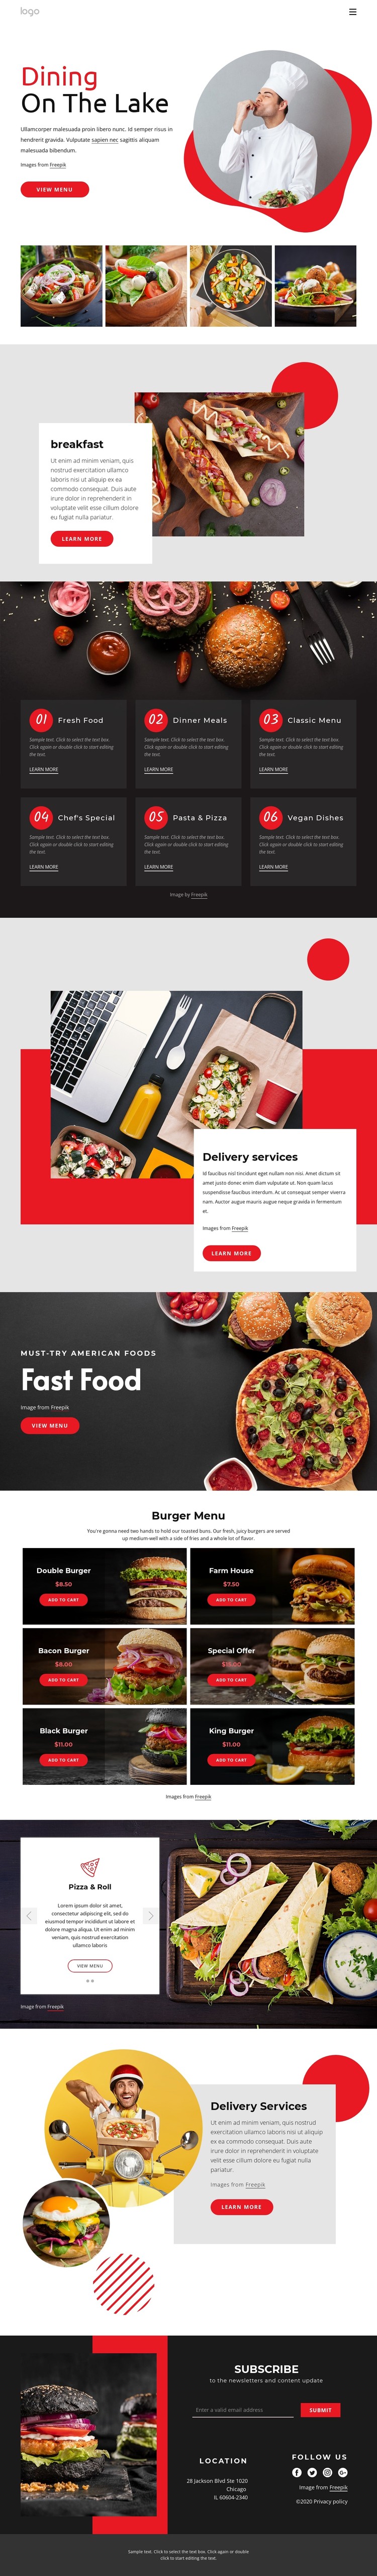 Dining on the lake CSS Template